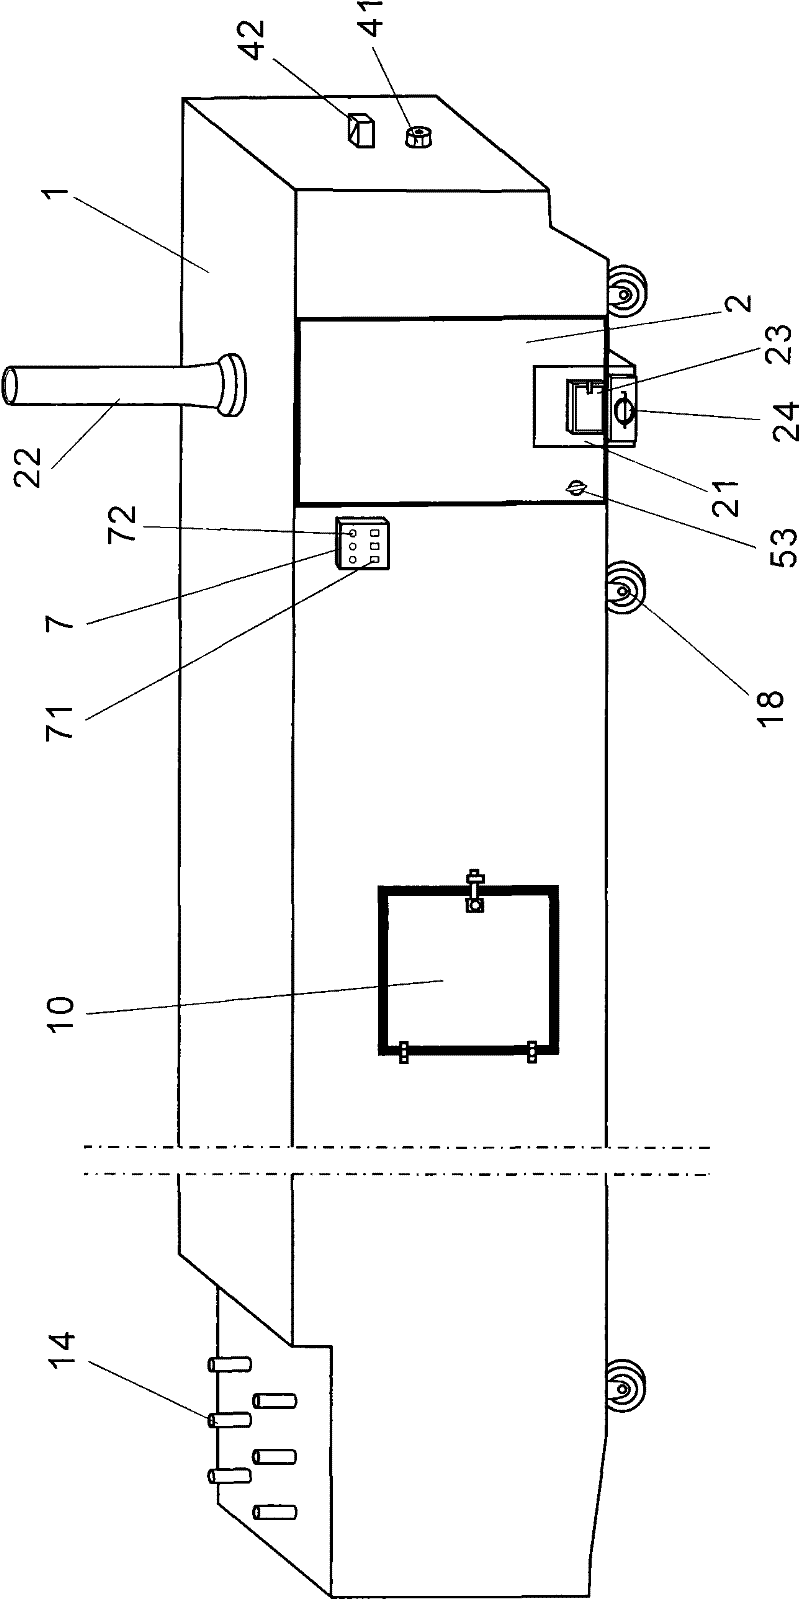 Circulating fruit and vegetable drying box with heat exchange device